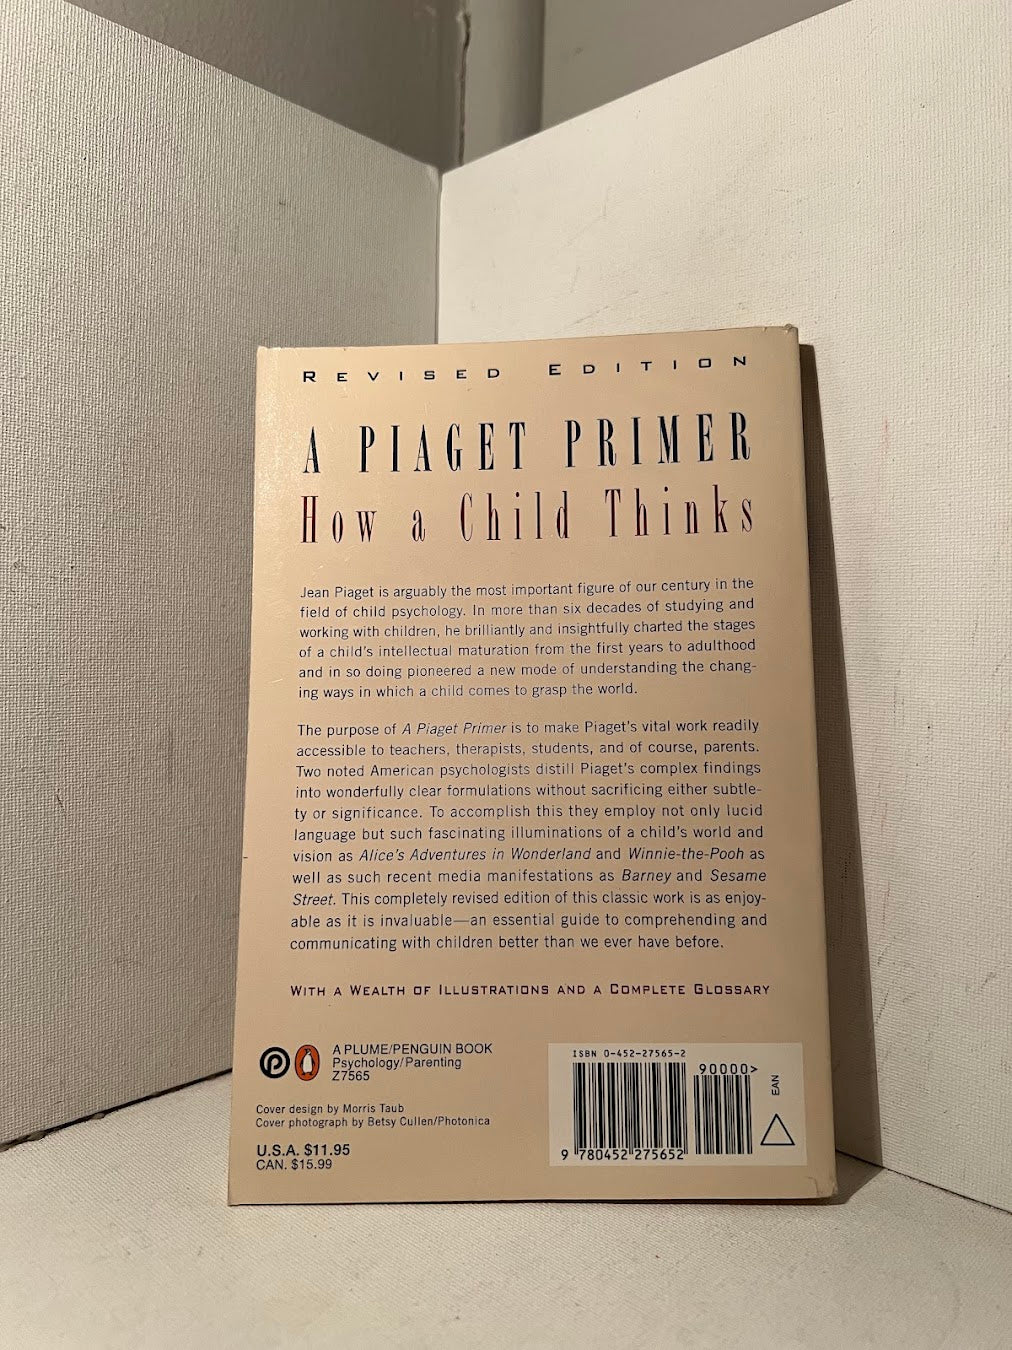 A Piaget Primer by Dorothy G. Singer and Tracey A. Revenson